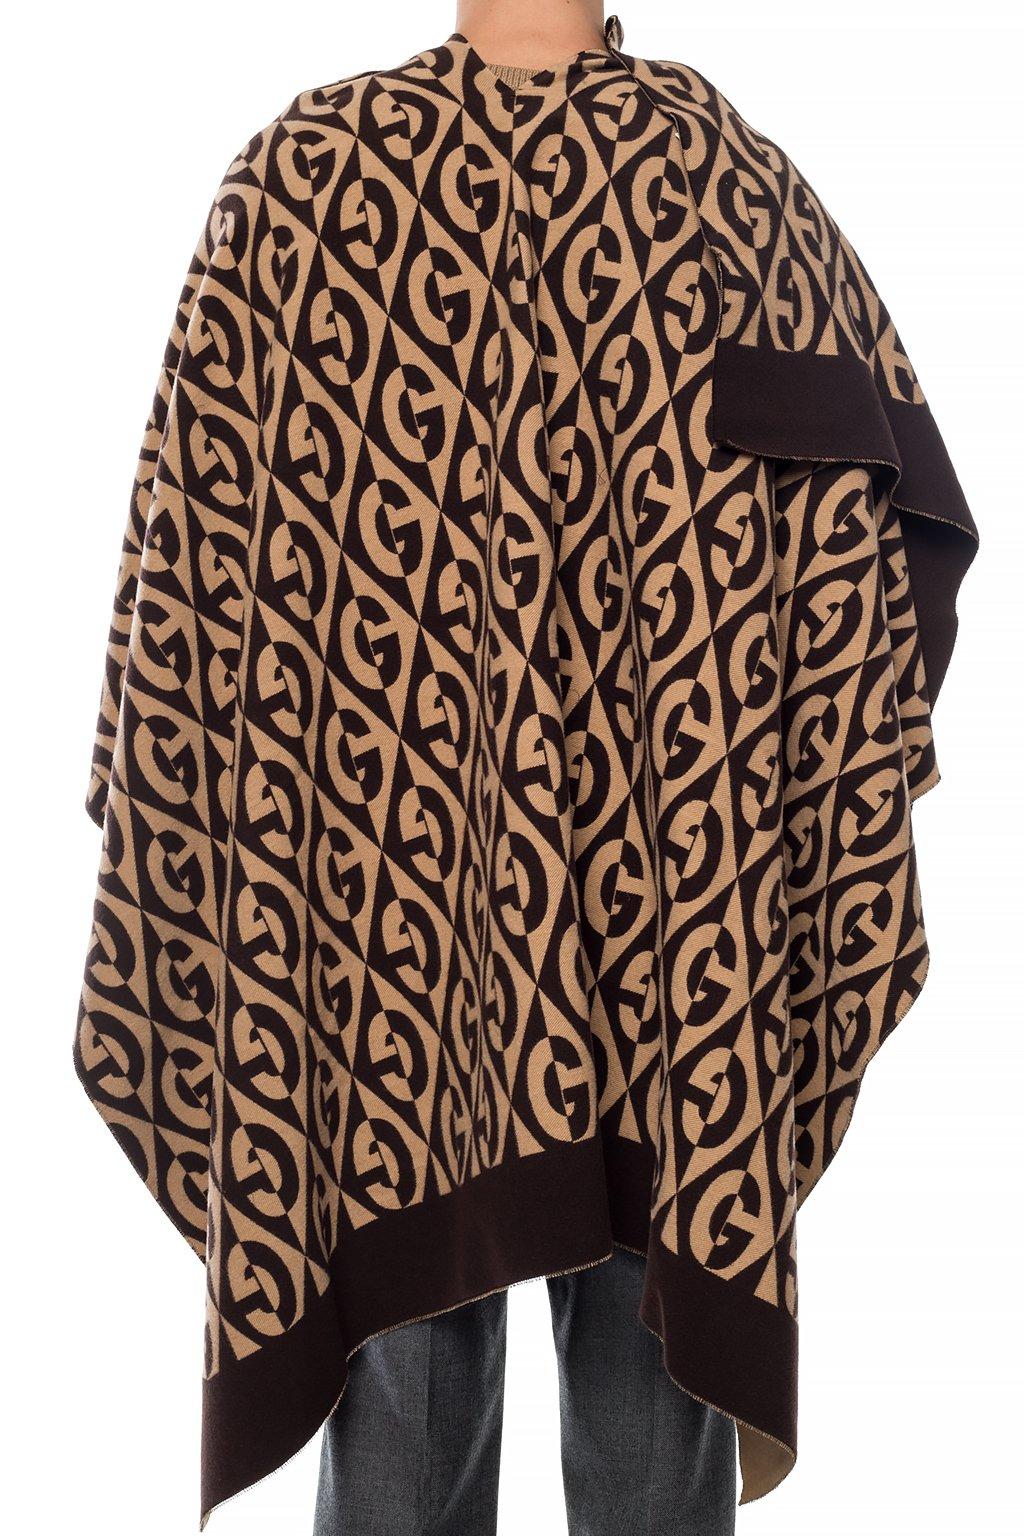 Gucci Wool Poncho With Logo Pattern in Brown for Men - Lyst